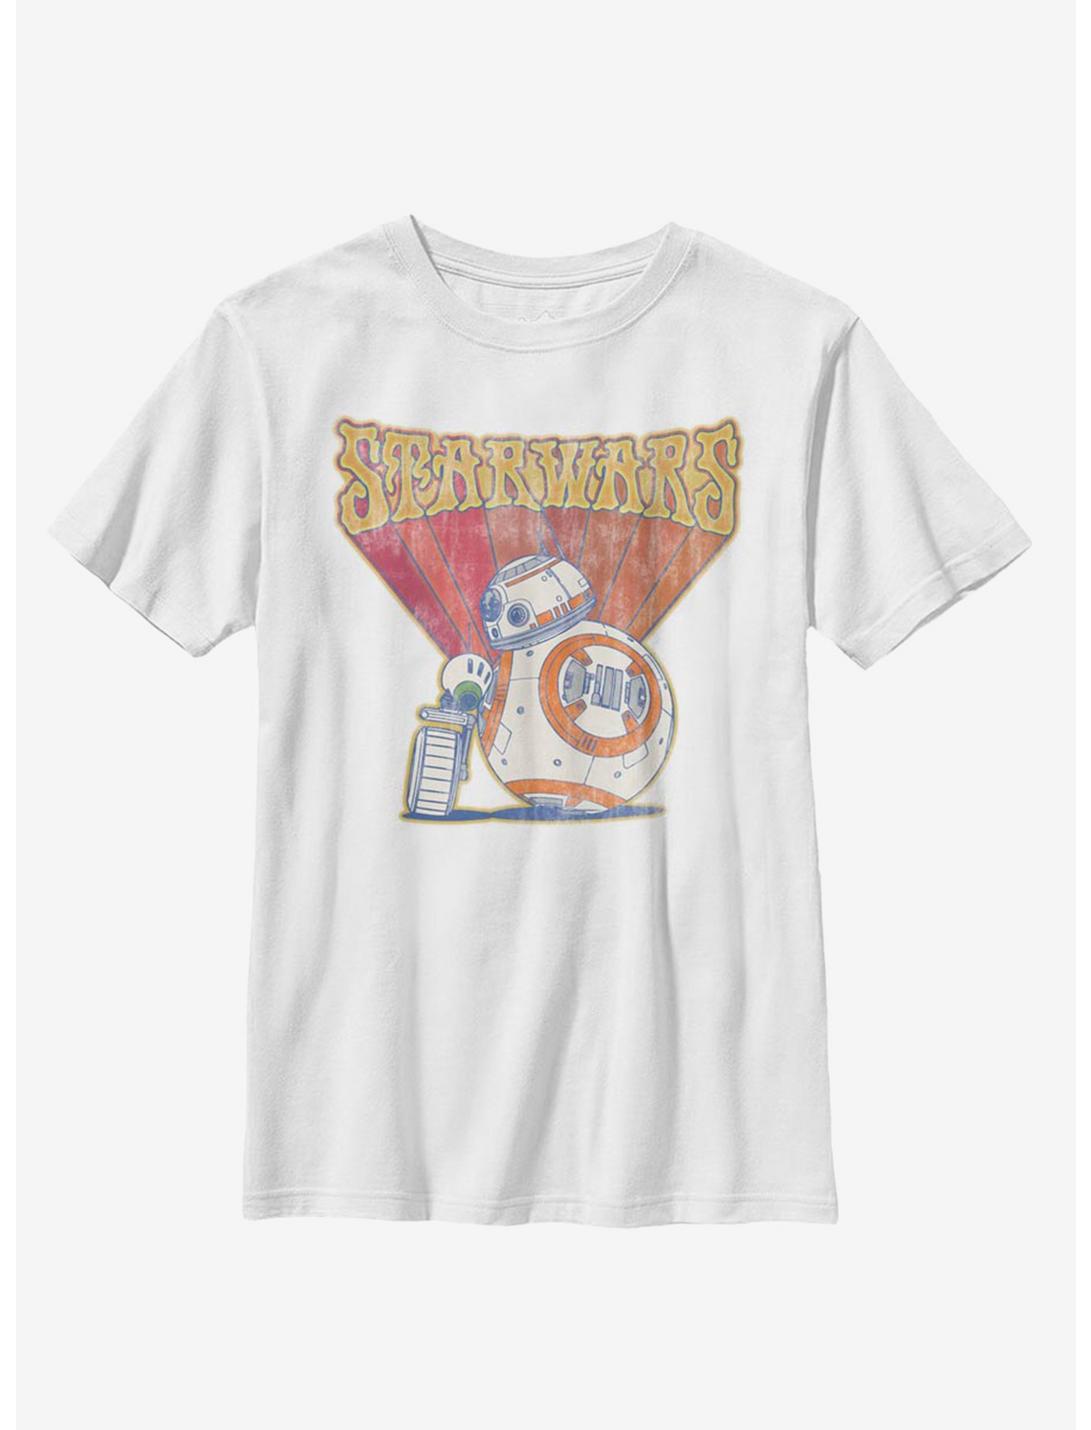 Star Wars Episode IX The Rise Of Skywalker BB-8 Retro Youth T-Shirt, WHITE, hi-res